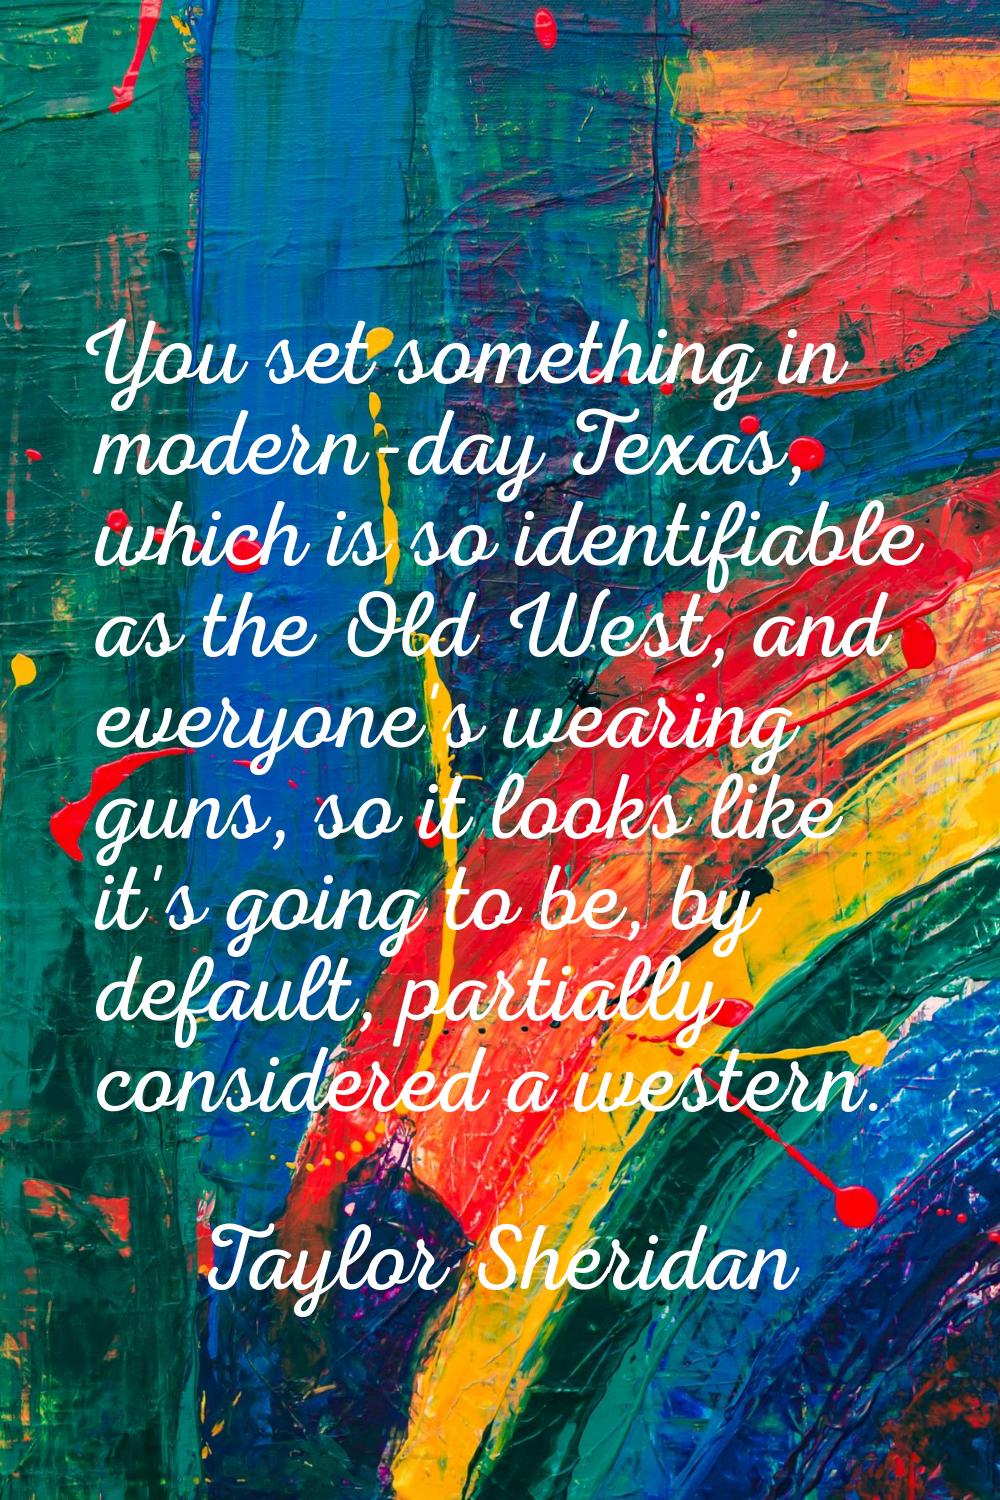 You set something in modern-day Texas, which is so identifiable as the Old West, and everyone's wea